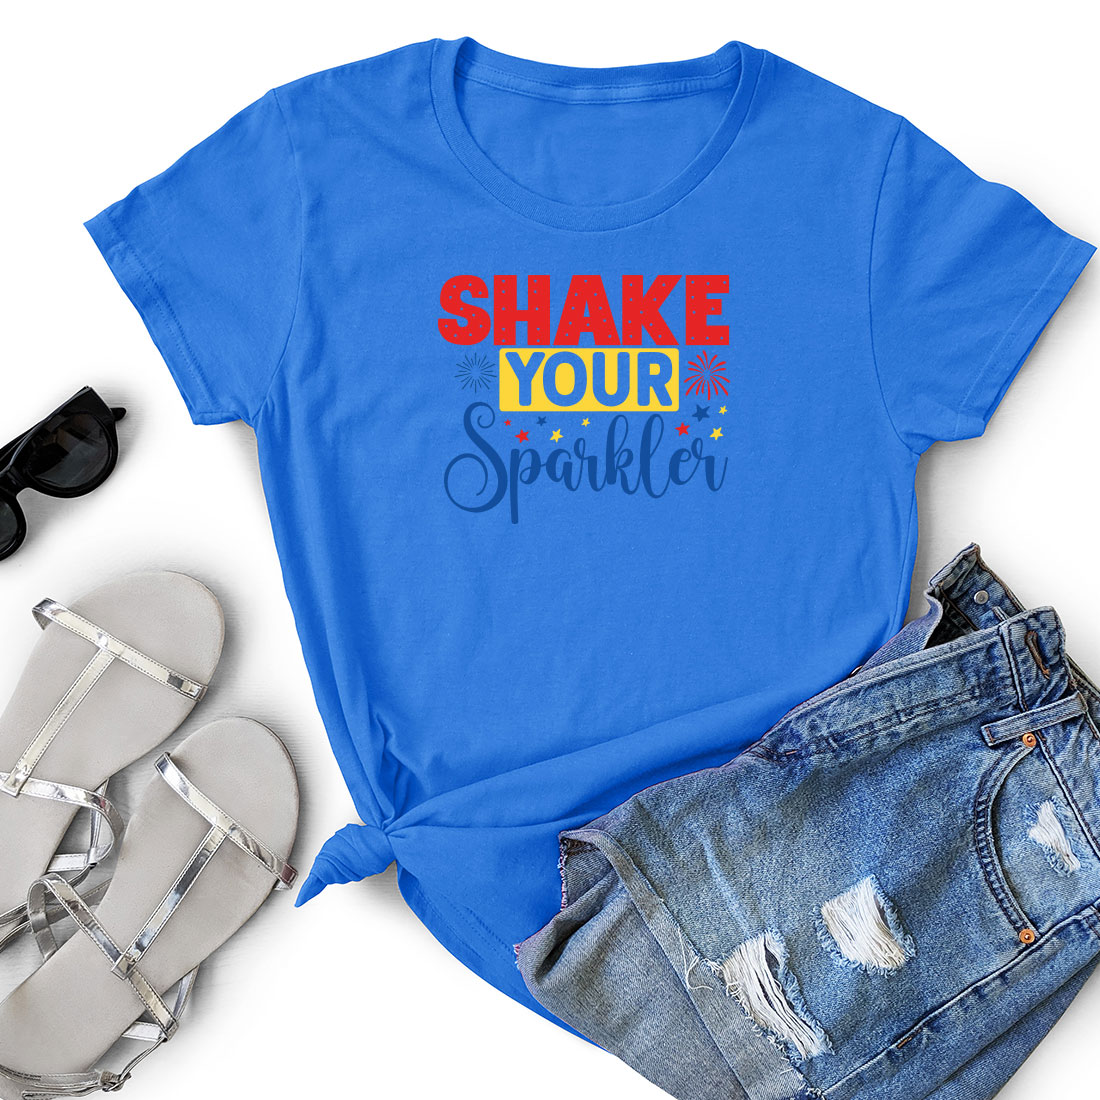 T - shirt that says shake your sparkler next to a pair of shorts.